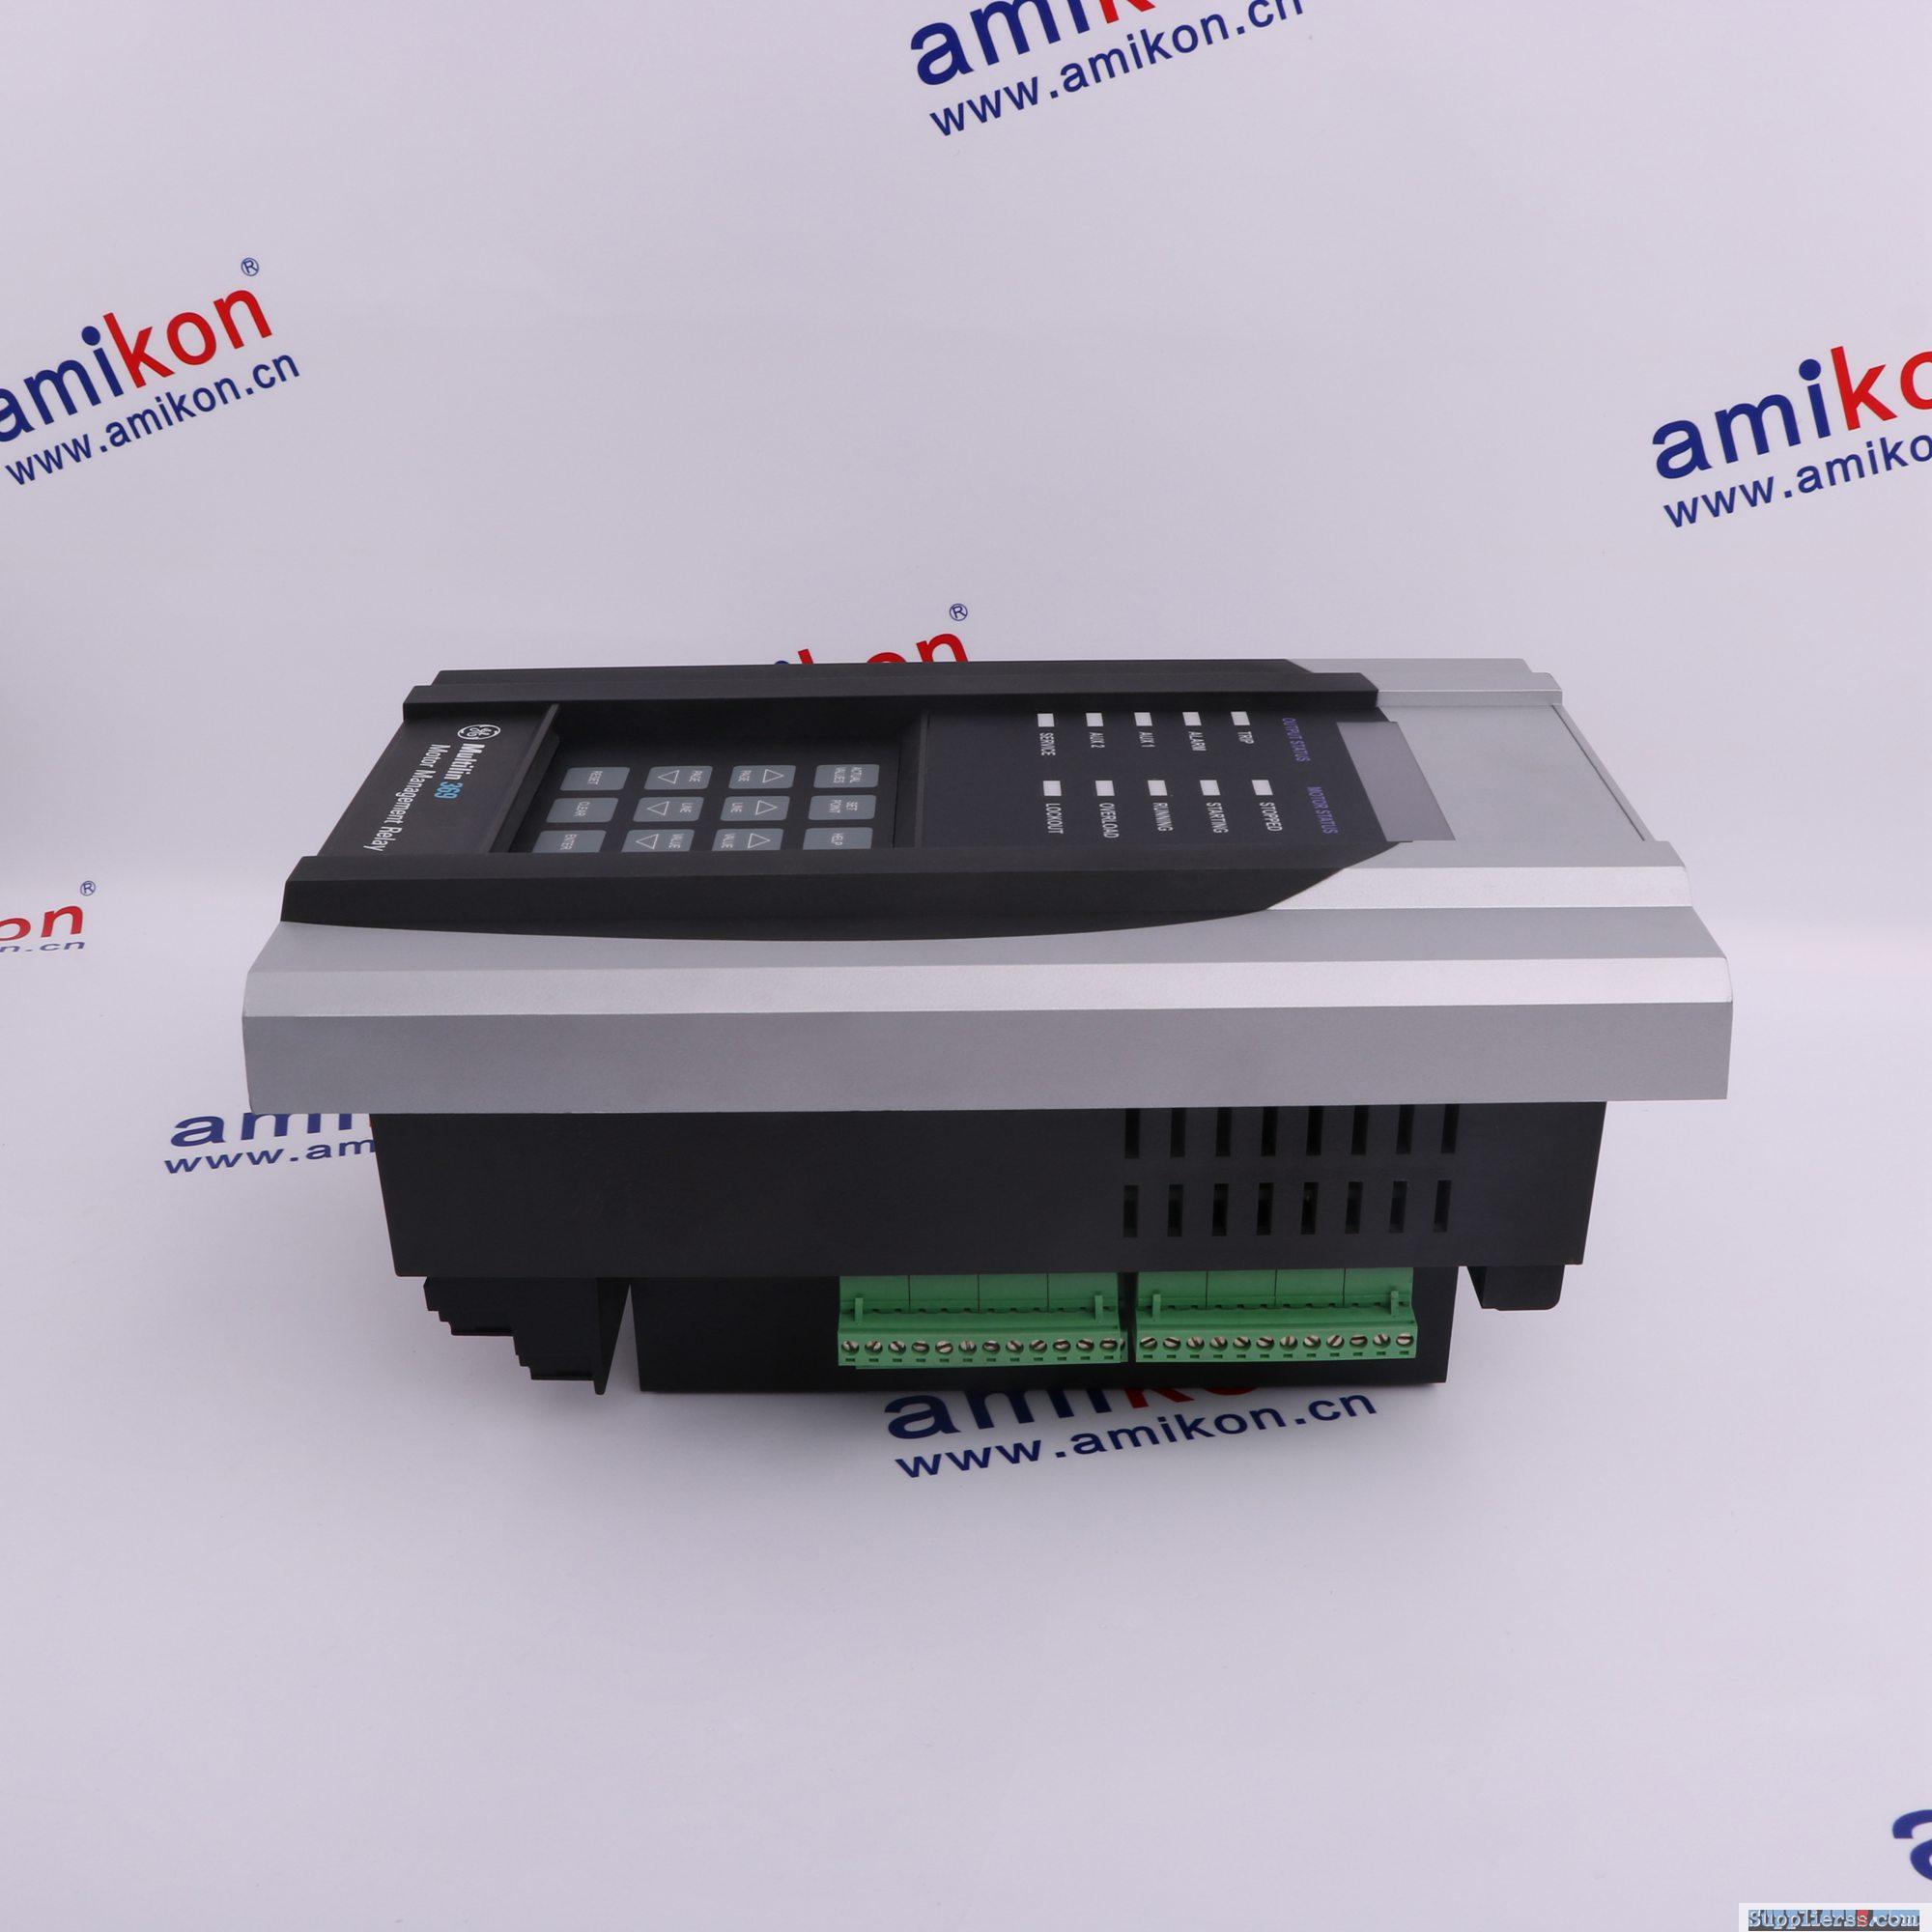 BEST PRICE IC694PWR331CA PLS CONTACT:sales8@amikon.cn/+86 18030235313